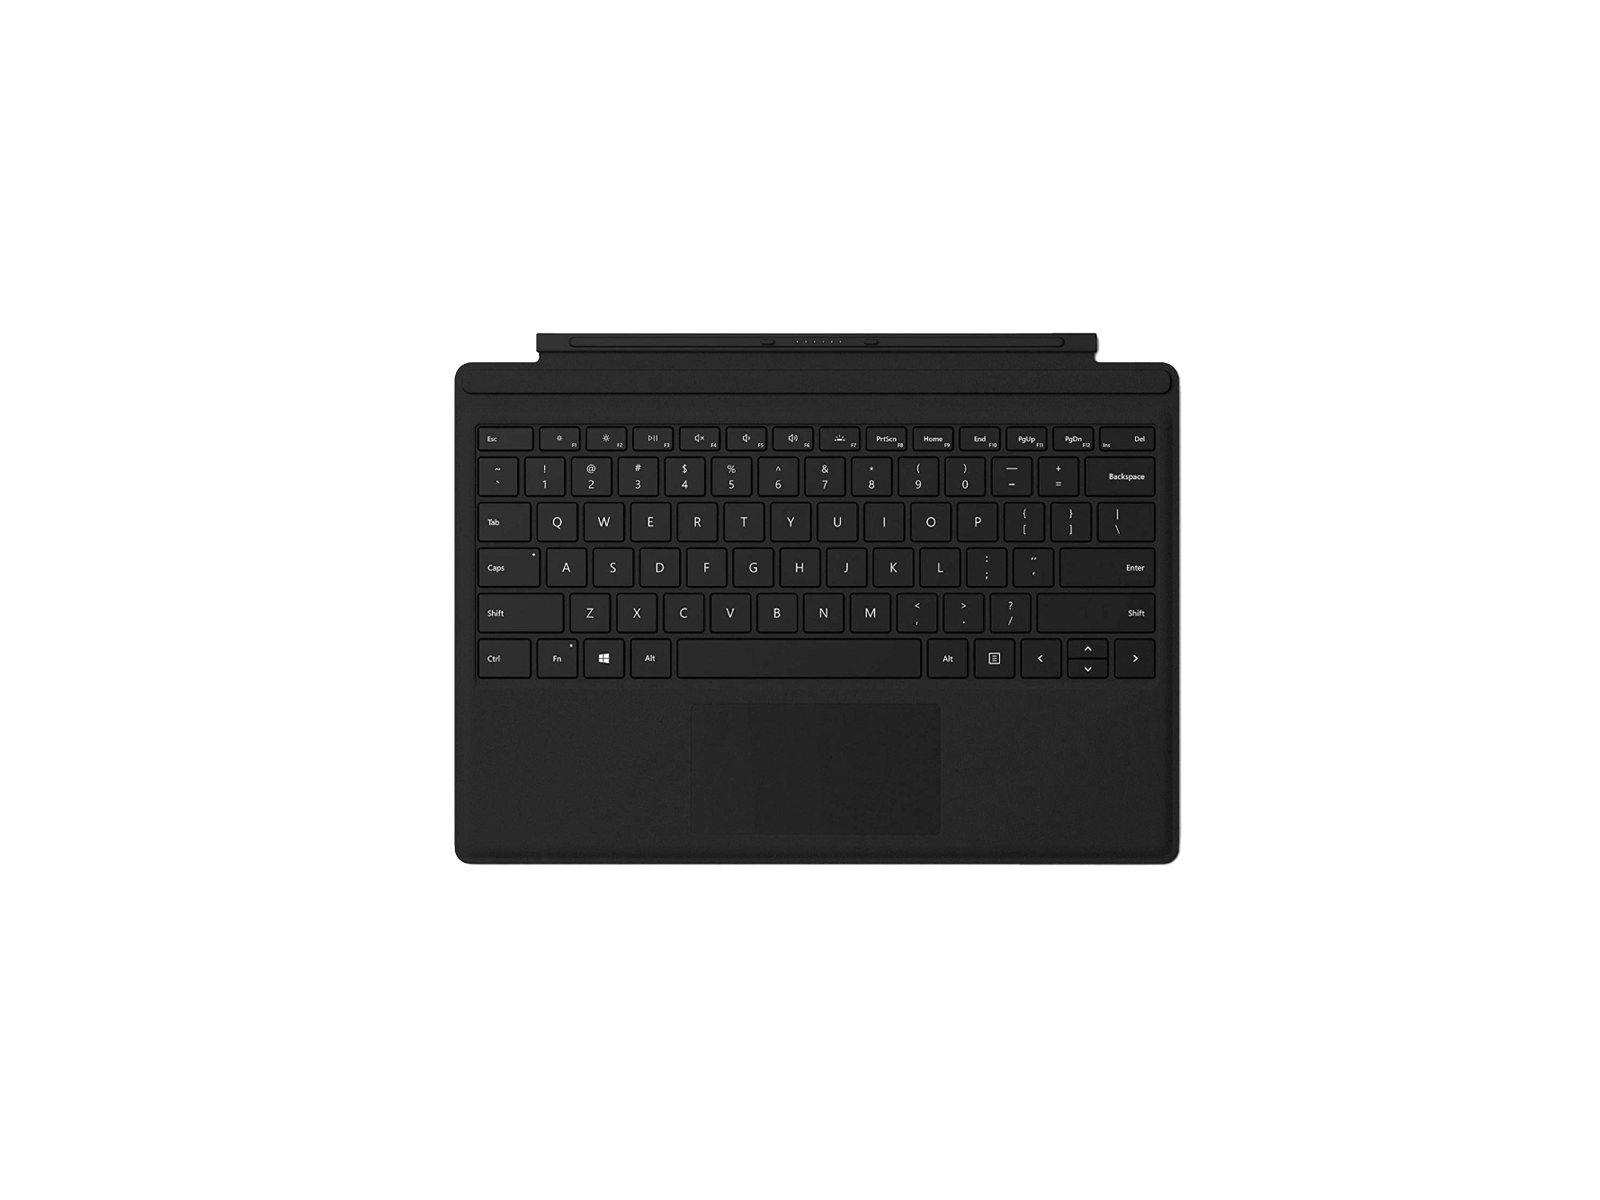 Lot of 5 Microsoft Surface Pro 4 5 6 7 7+ Type Cover Keyboard Black FMN-00001